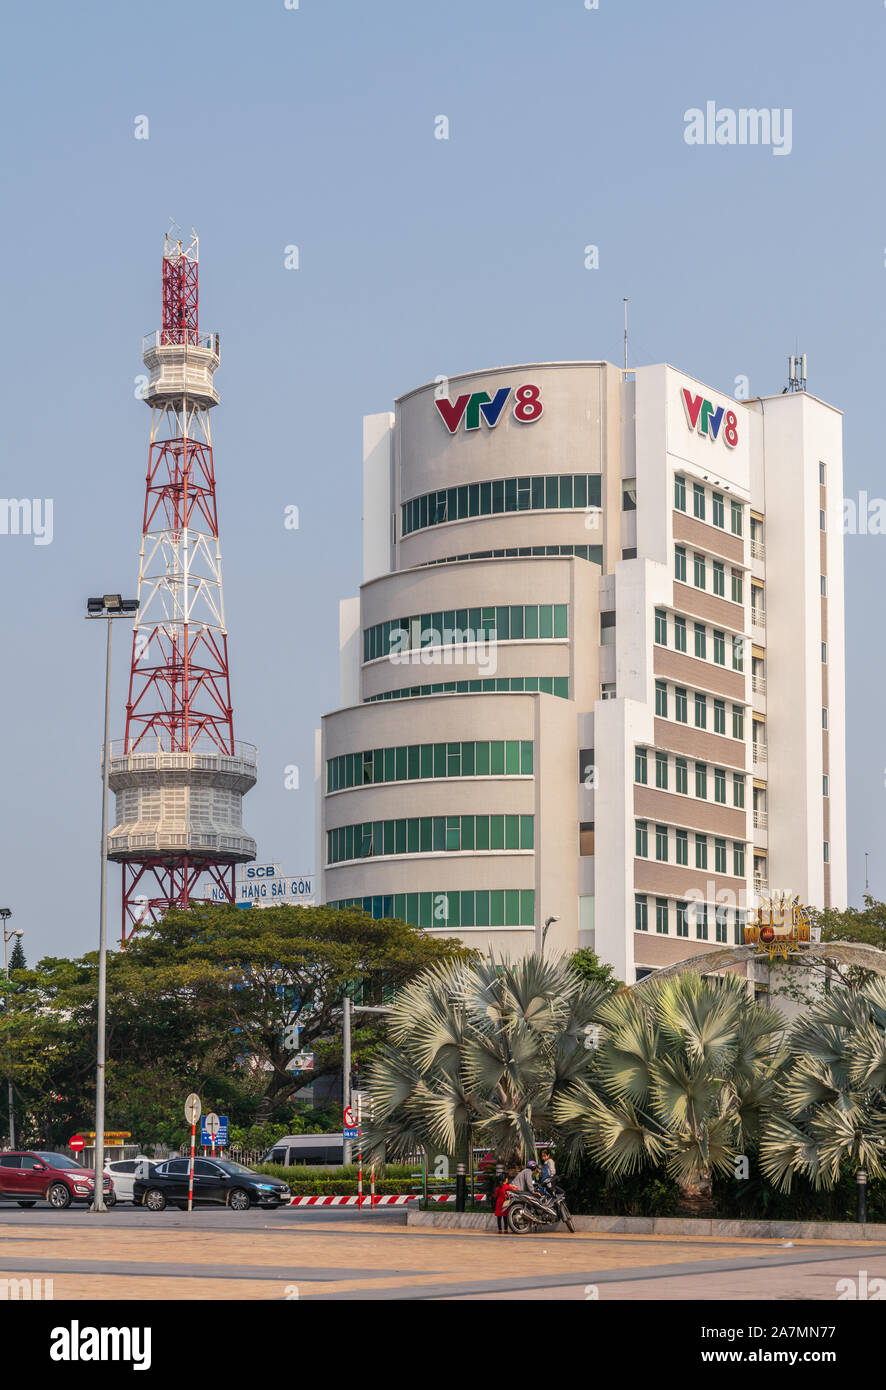 Da Nang, Vietnam - March 10, 2019: White stone Vietnam Television Center tall building and antenna tower on corner of Han River and Nguyen Van Linh ro Stock Photo